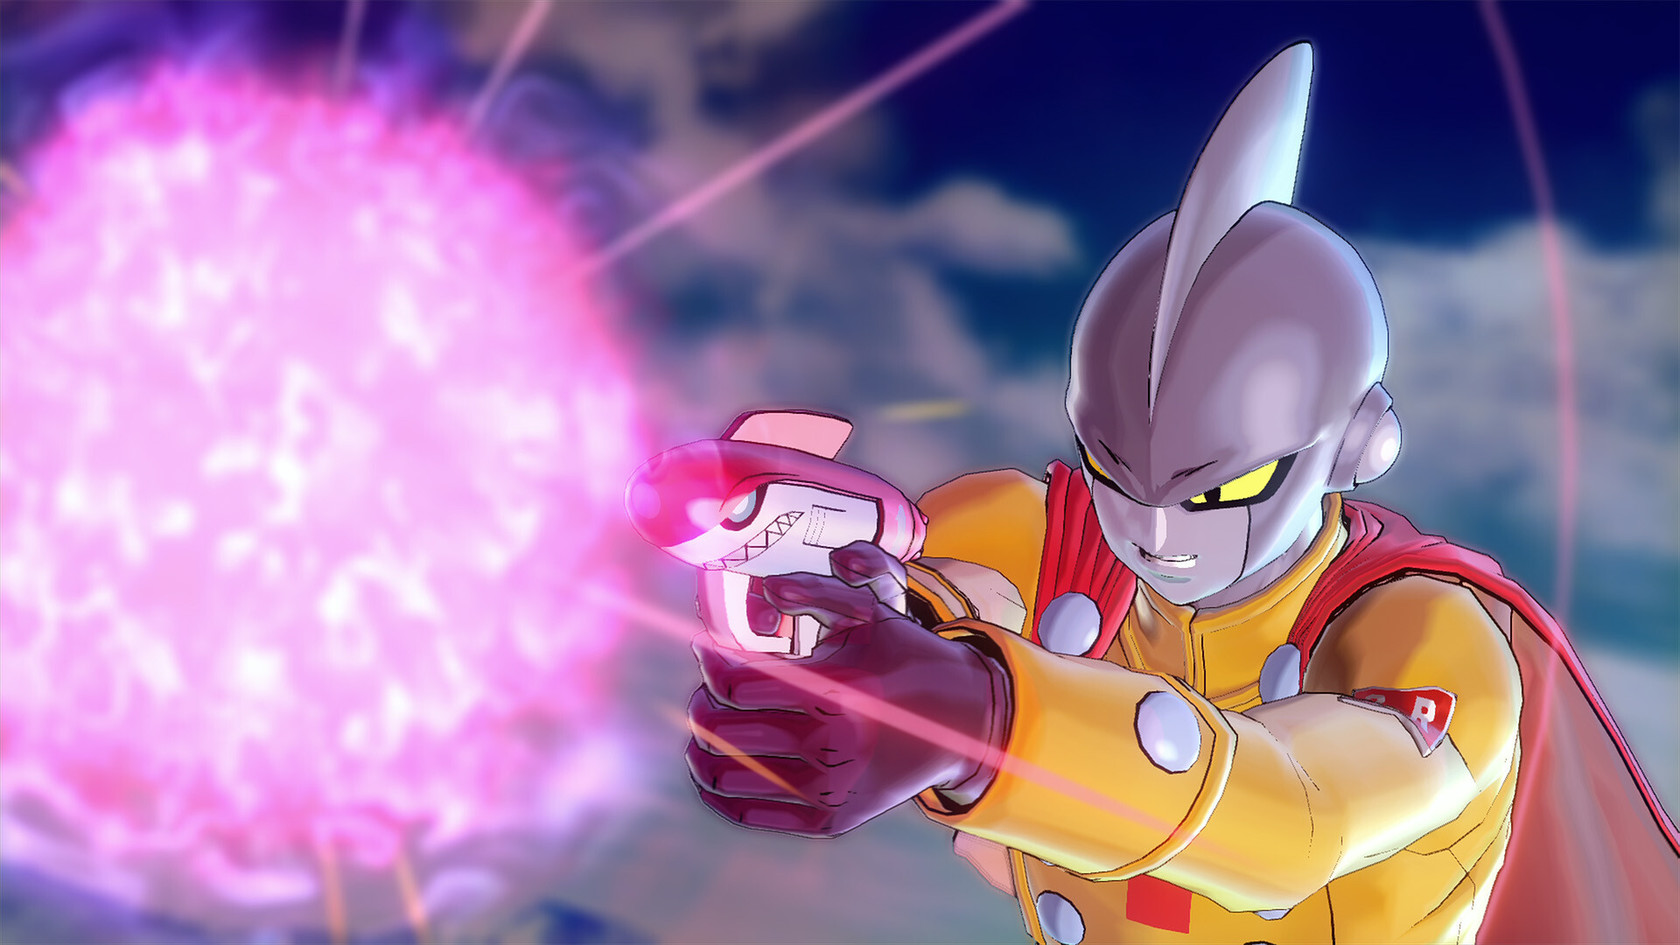 Dragon Ball Xenoverse 2 DLC 'Hero of Justice Pack 2' and free update teaser  trailer - Gematsu